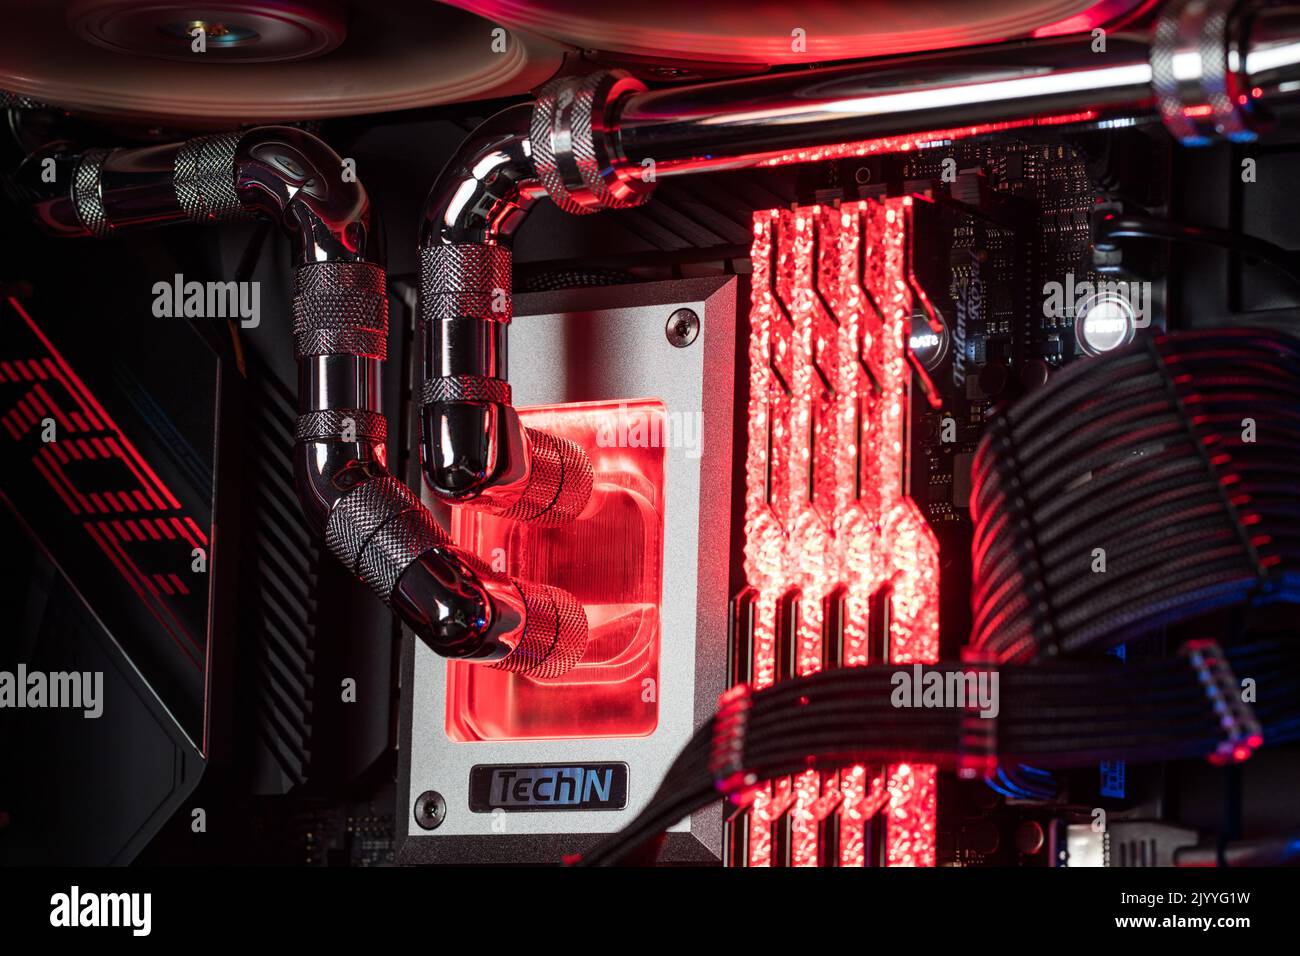 Prague, Czech Republic - 21 July 2021: Close-up of high performance Desktop PC and water cooling system with multicolored LED RGB light show status on Stock Photo